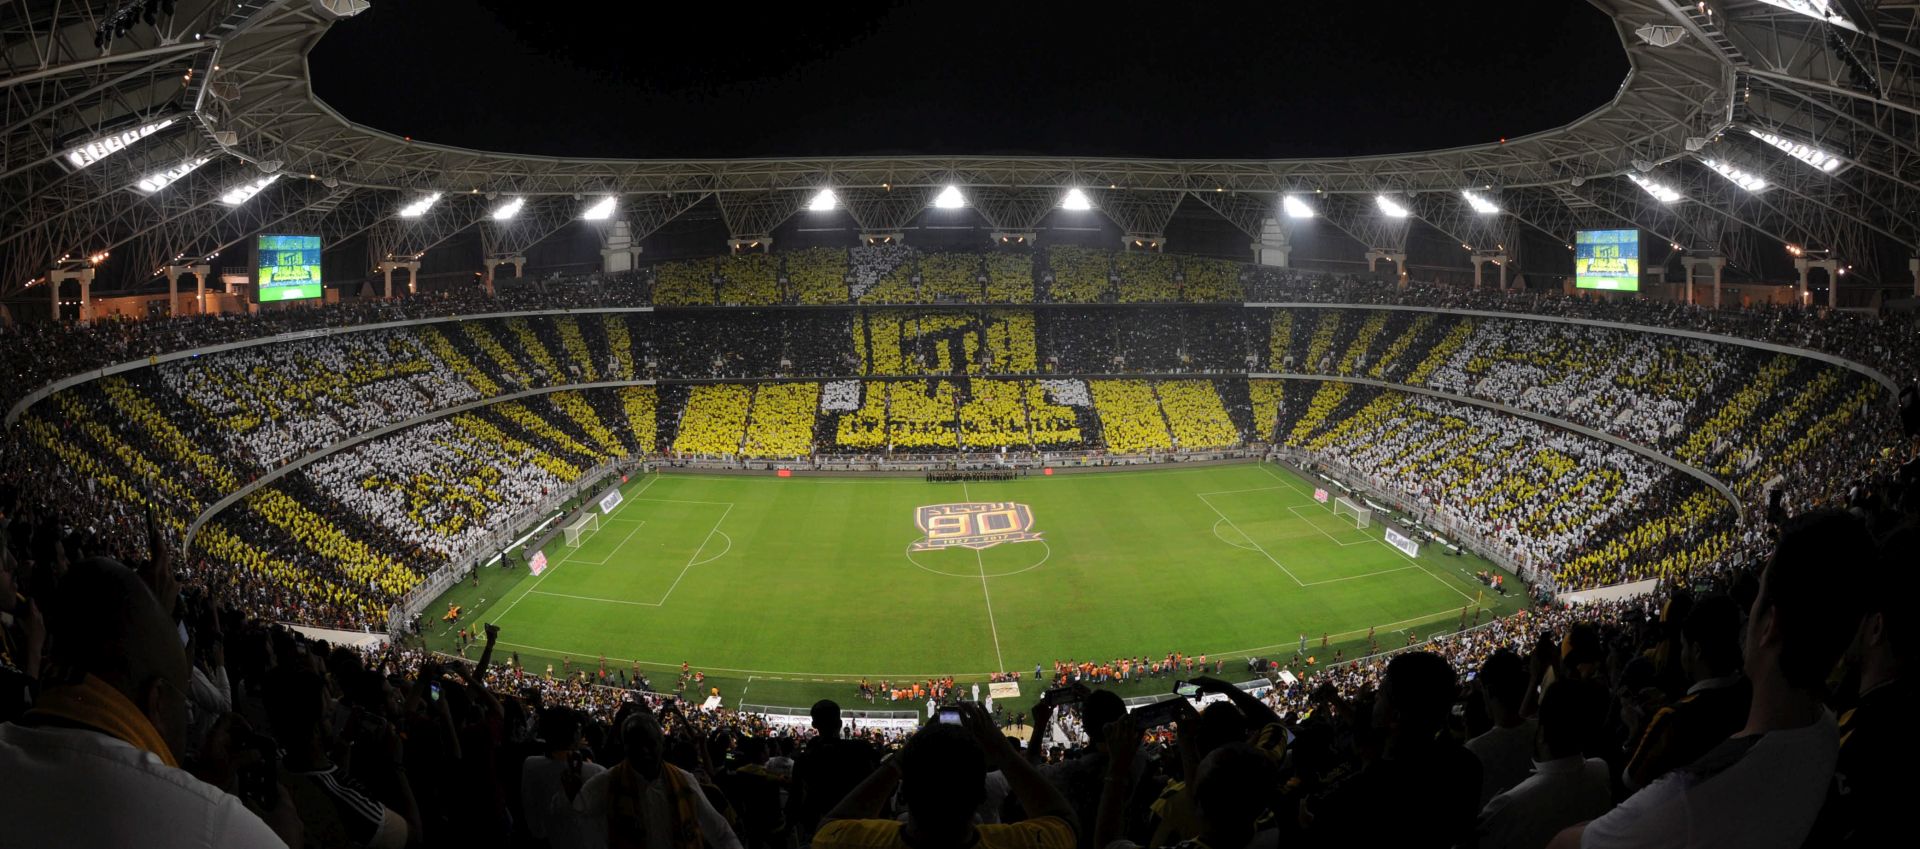 epa08108045 (FILE) - Al-Ittihad fans fill the stadium before a friendly soccer match between Al-Ittihad and Atletico Madrid at King Abdullah Sports City stadium, nicknamed al-Jawhra (the Jewel), Jeddah, Saudi Arabia, 30 December 2016 (re-issued 06 January 2020). The Spanish Super Cup 2019-20 (Supercopa de Espana) will be held at the stadium over two semi finals on 08 and 09 January 2020 and the final on 12 January 2020. The four teams taking part are Valencia, Barcelona, Real Madrid and Atletico Madrid.  EPA/STR *** Local Caption *** 53189586